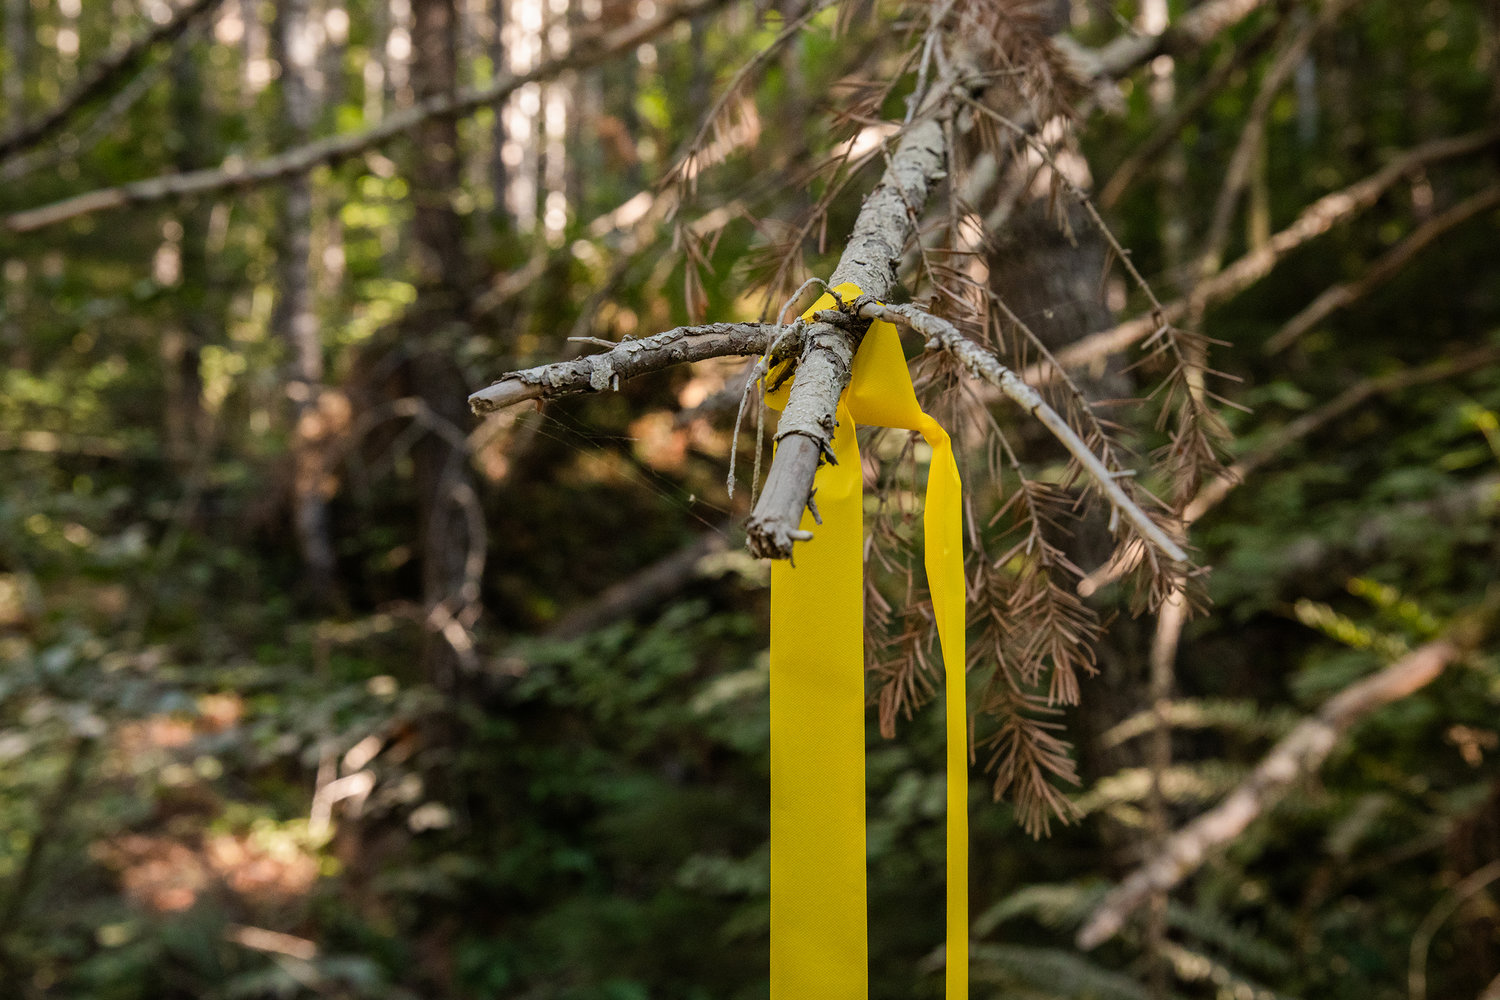 District Silviculturist Cheyenne Adamonis tied ribbon around branches to mark projects for a Pinchot Partners Field Trip around Packwood on Wednesday.